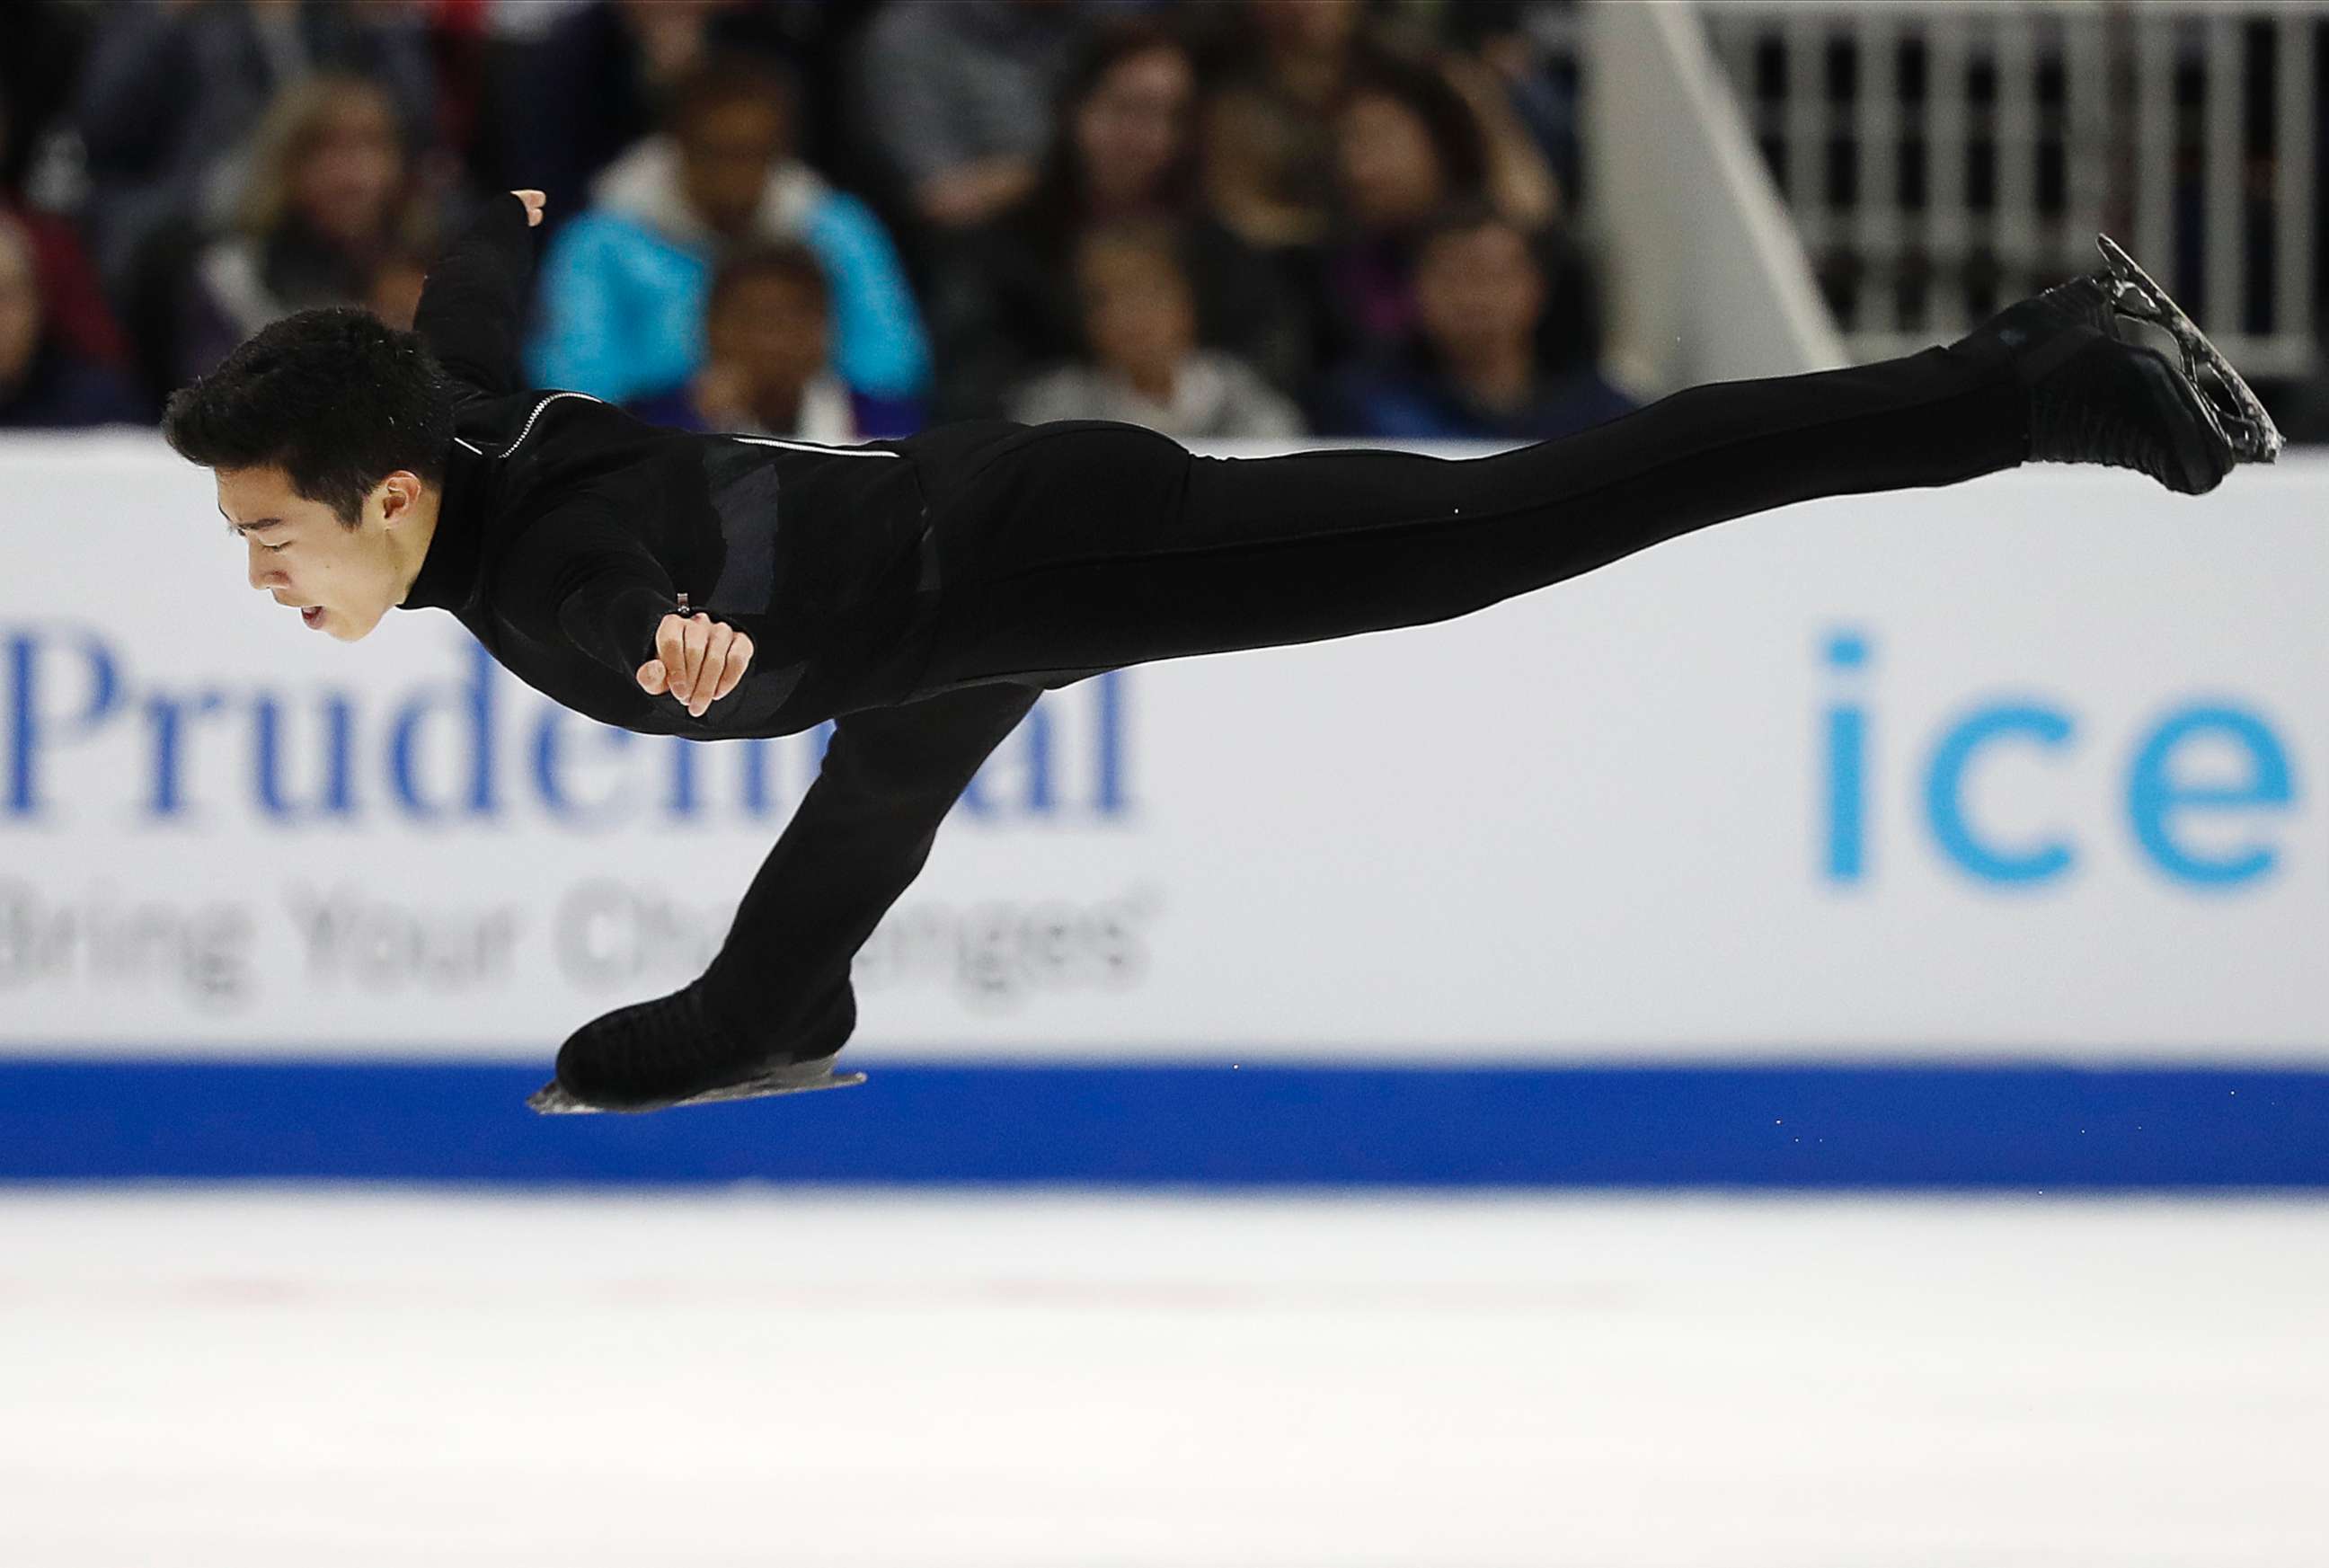 PHOTO: Nathan Chen performs during the men's free skate event at the U.S. Figure Skating Championships in San Jose, Calif., Jan. 6, 2018.